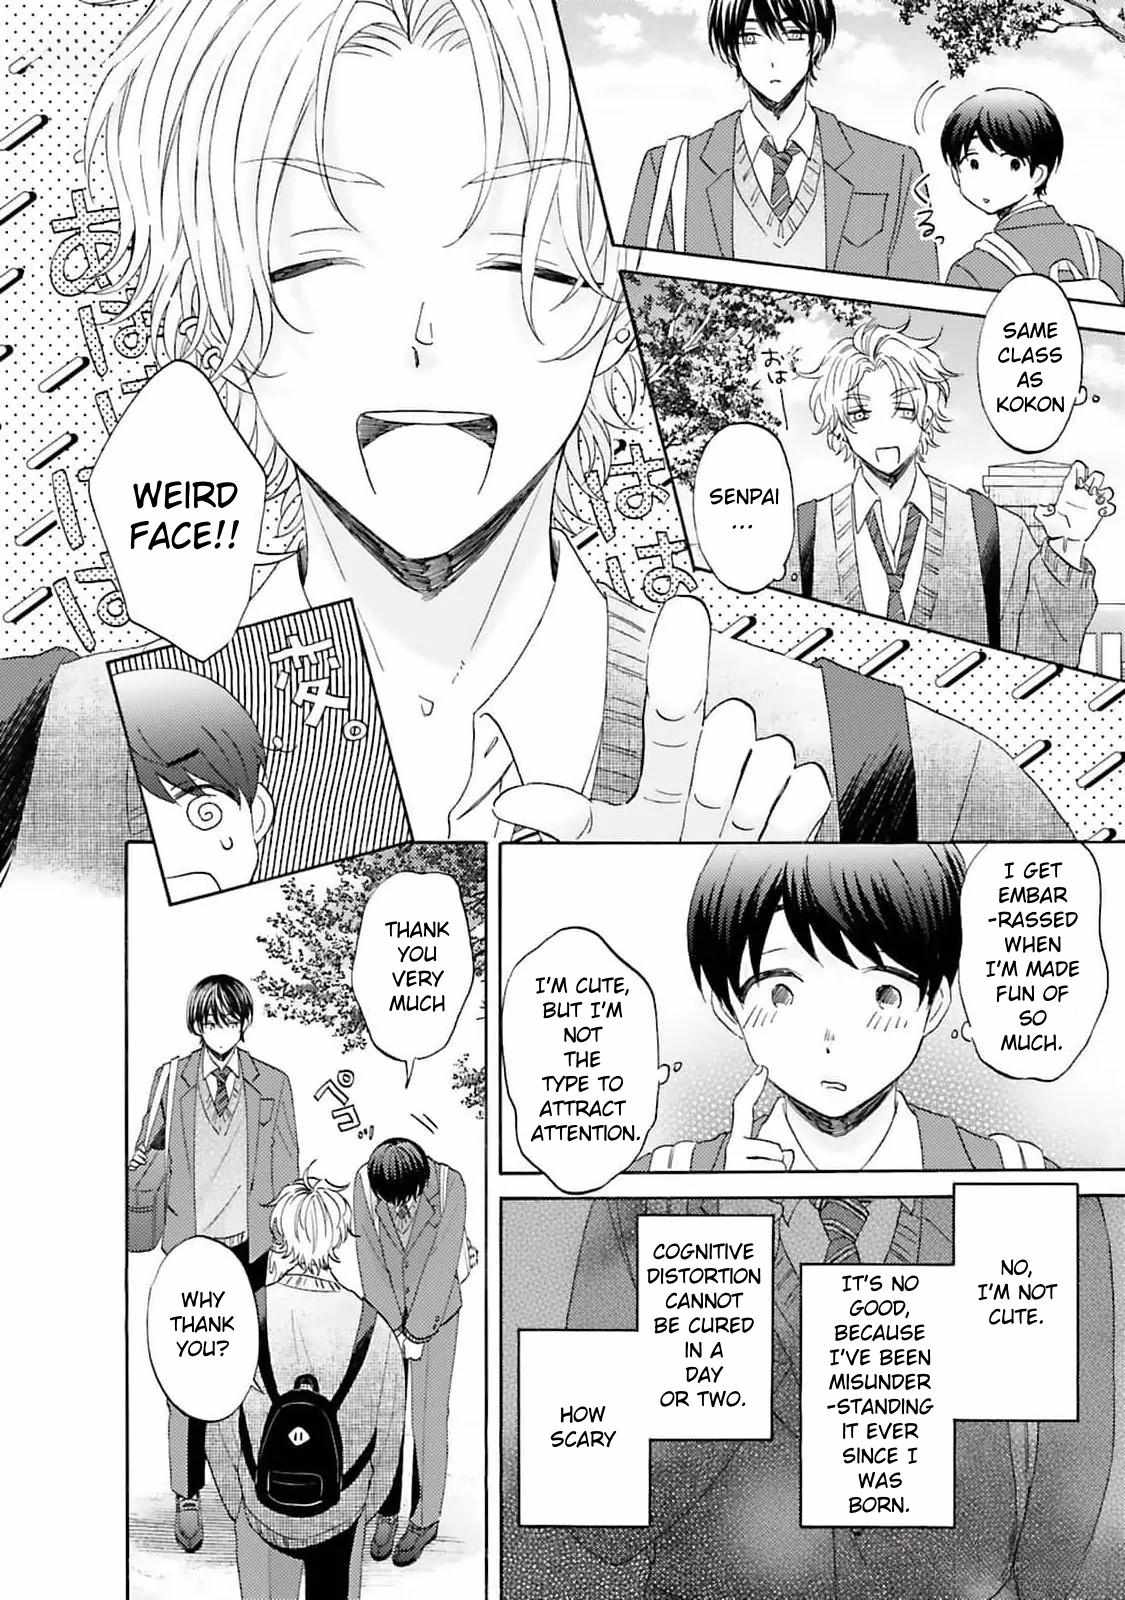 My Cutie Pie -An Ordinary Boy And His Gorgeous Childhood Friend- 〘Official〙 - 5 page 26-441954e6